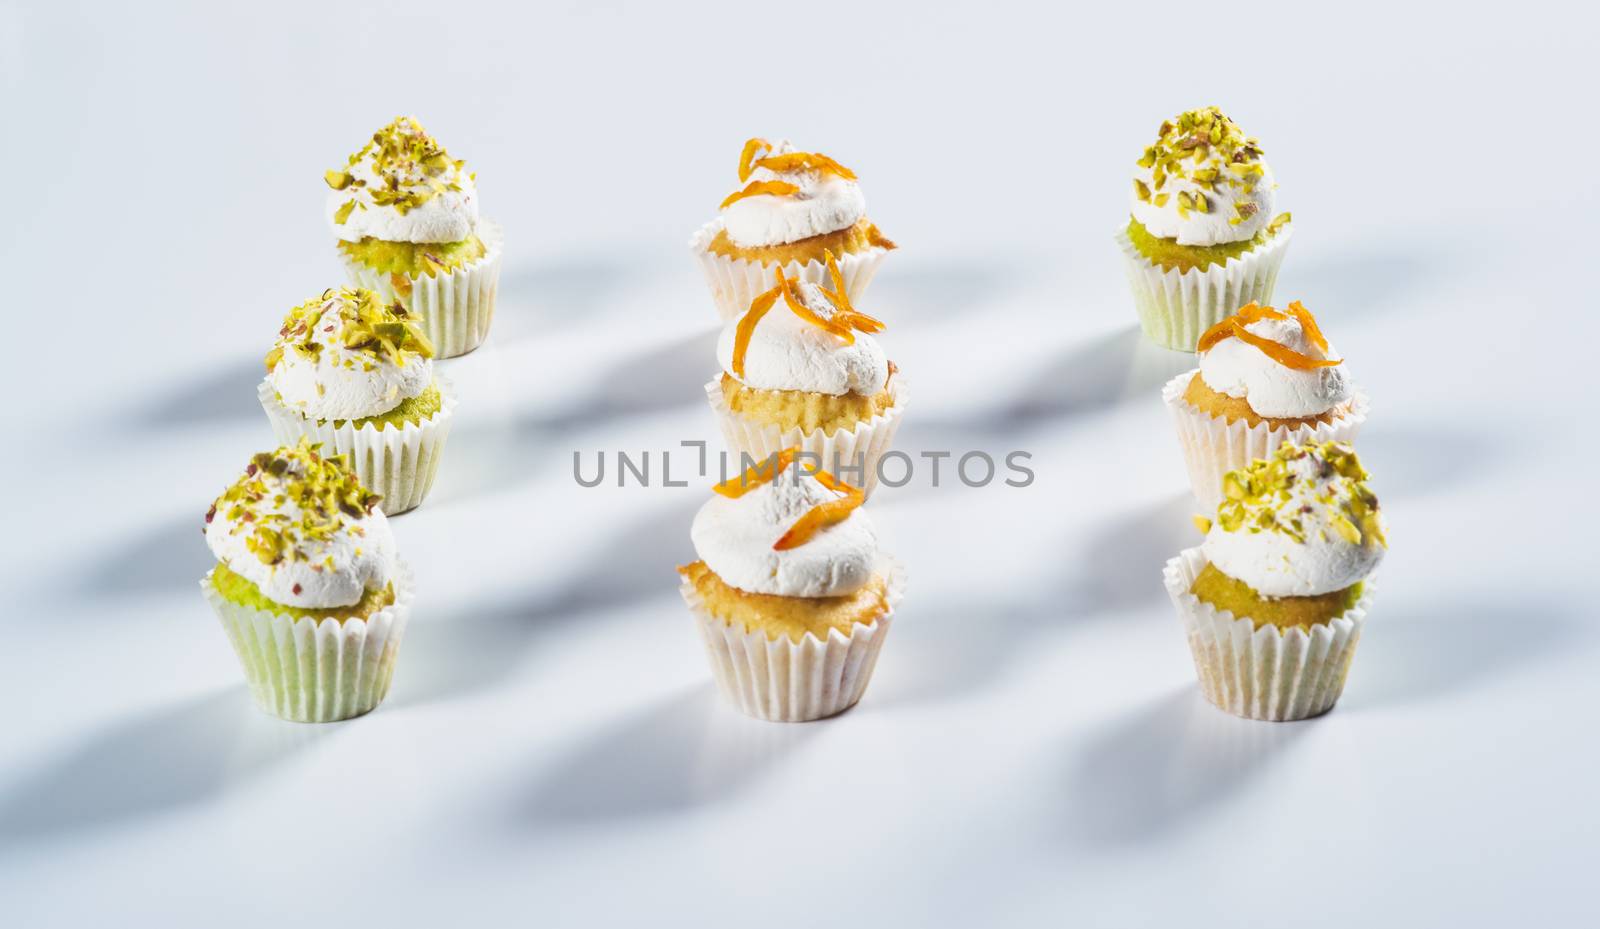 Lots small muffins with meringue on the top on light background